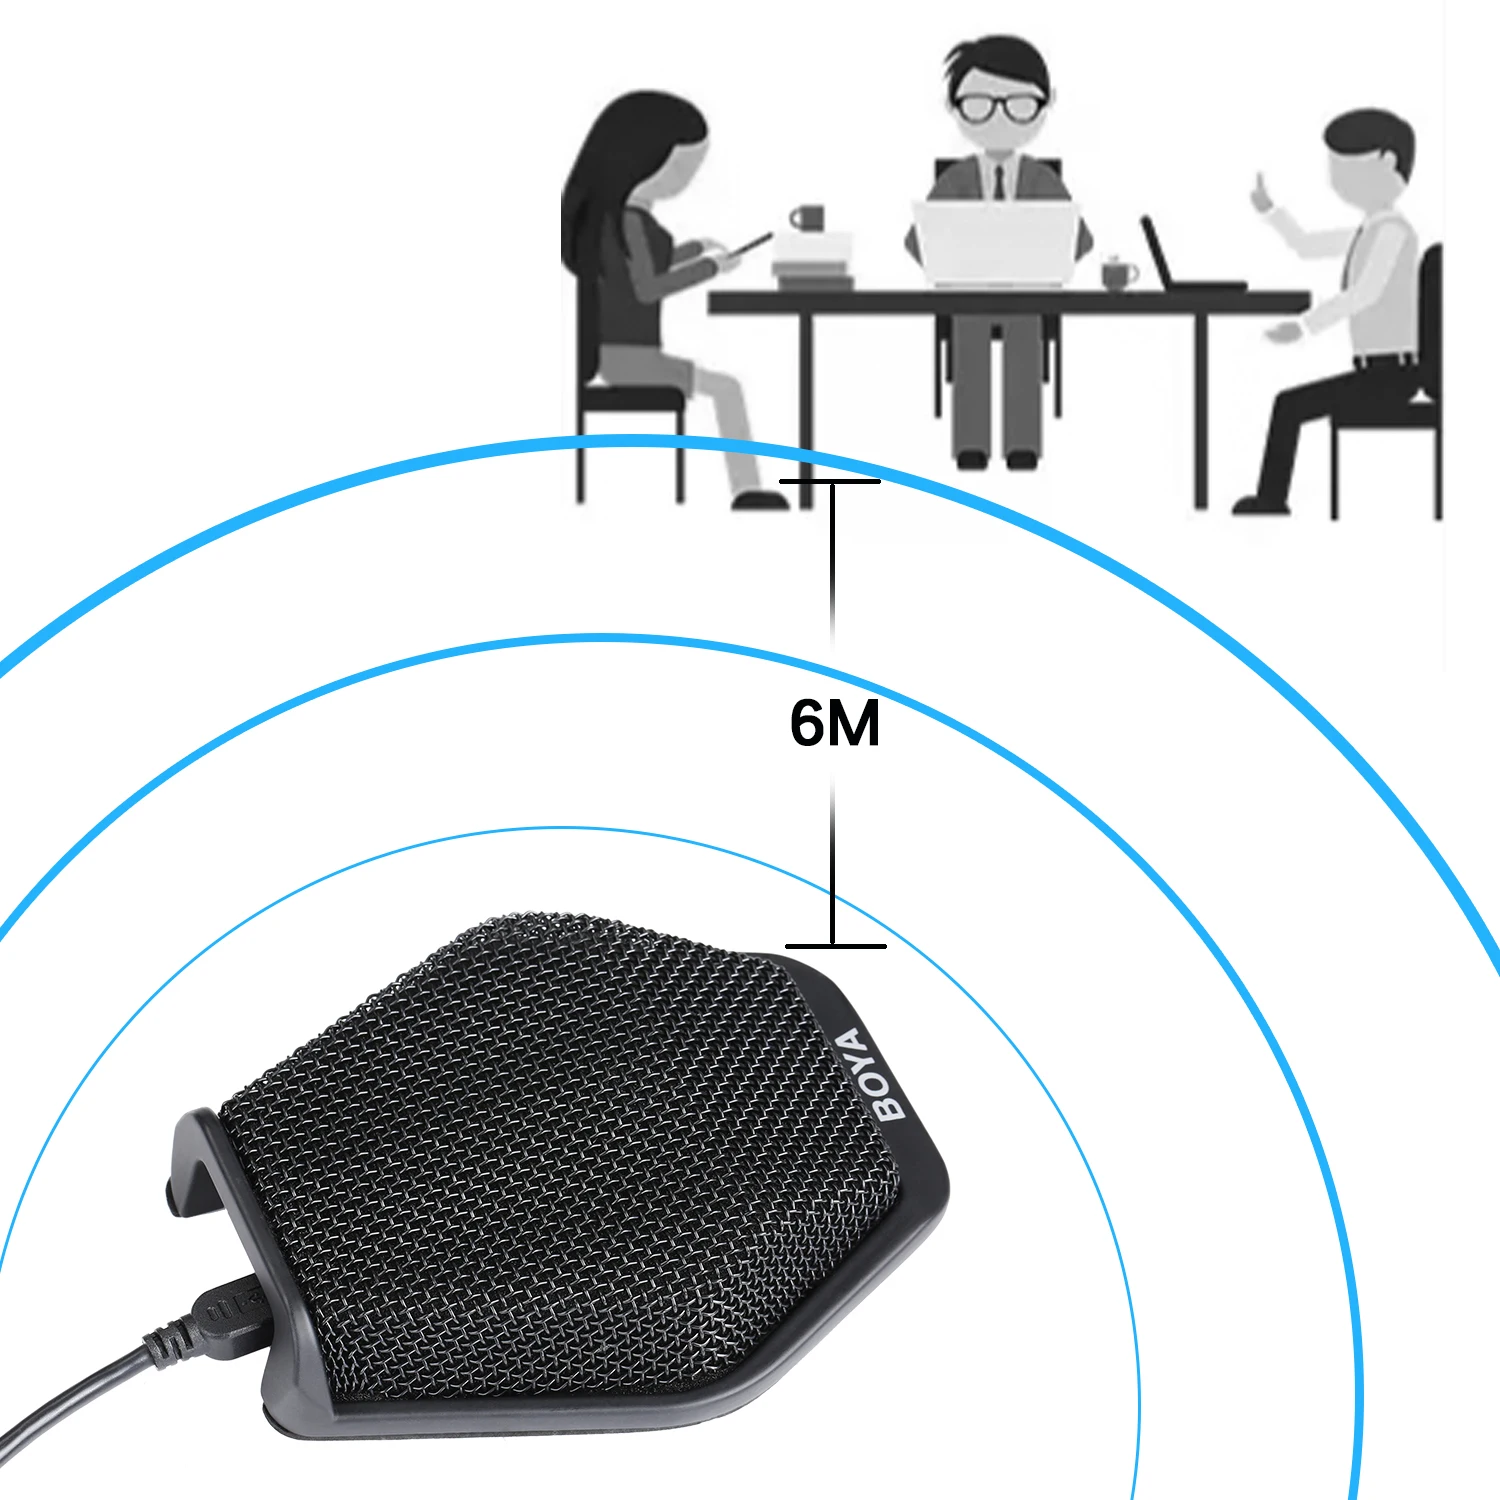 BOYA BY-MC2 USB Condenser Desktop Conference Computer Microphone with 180 Degree / 20' Pickup Range for Windows & Mac & Laptop enlarge